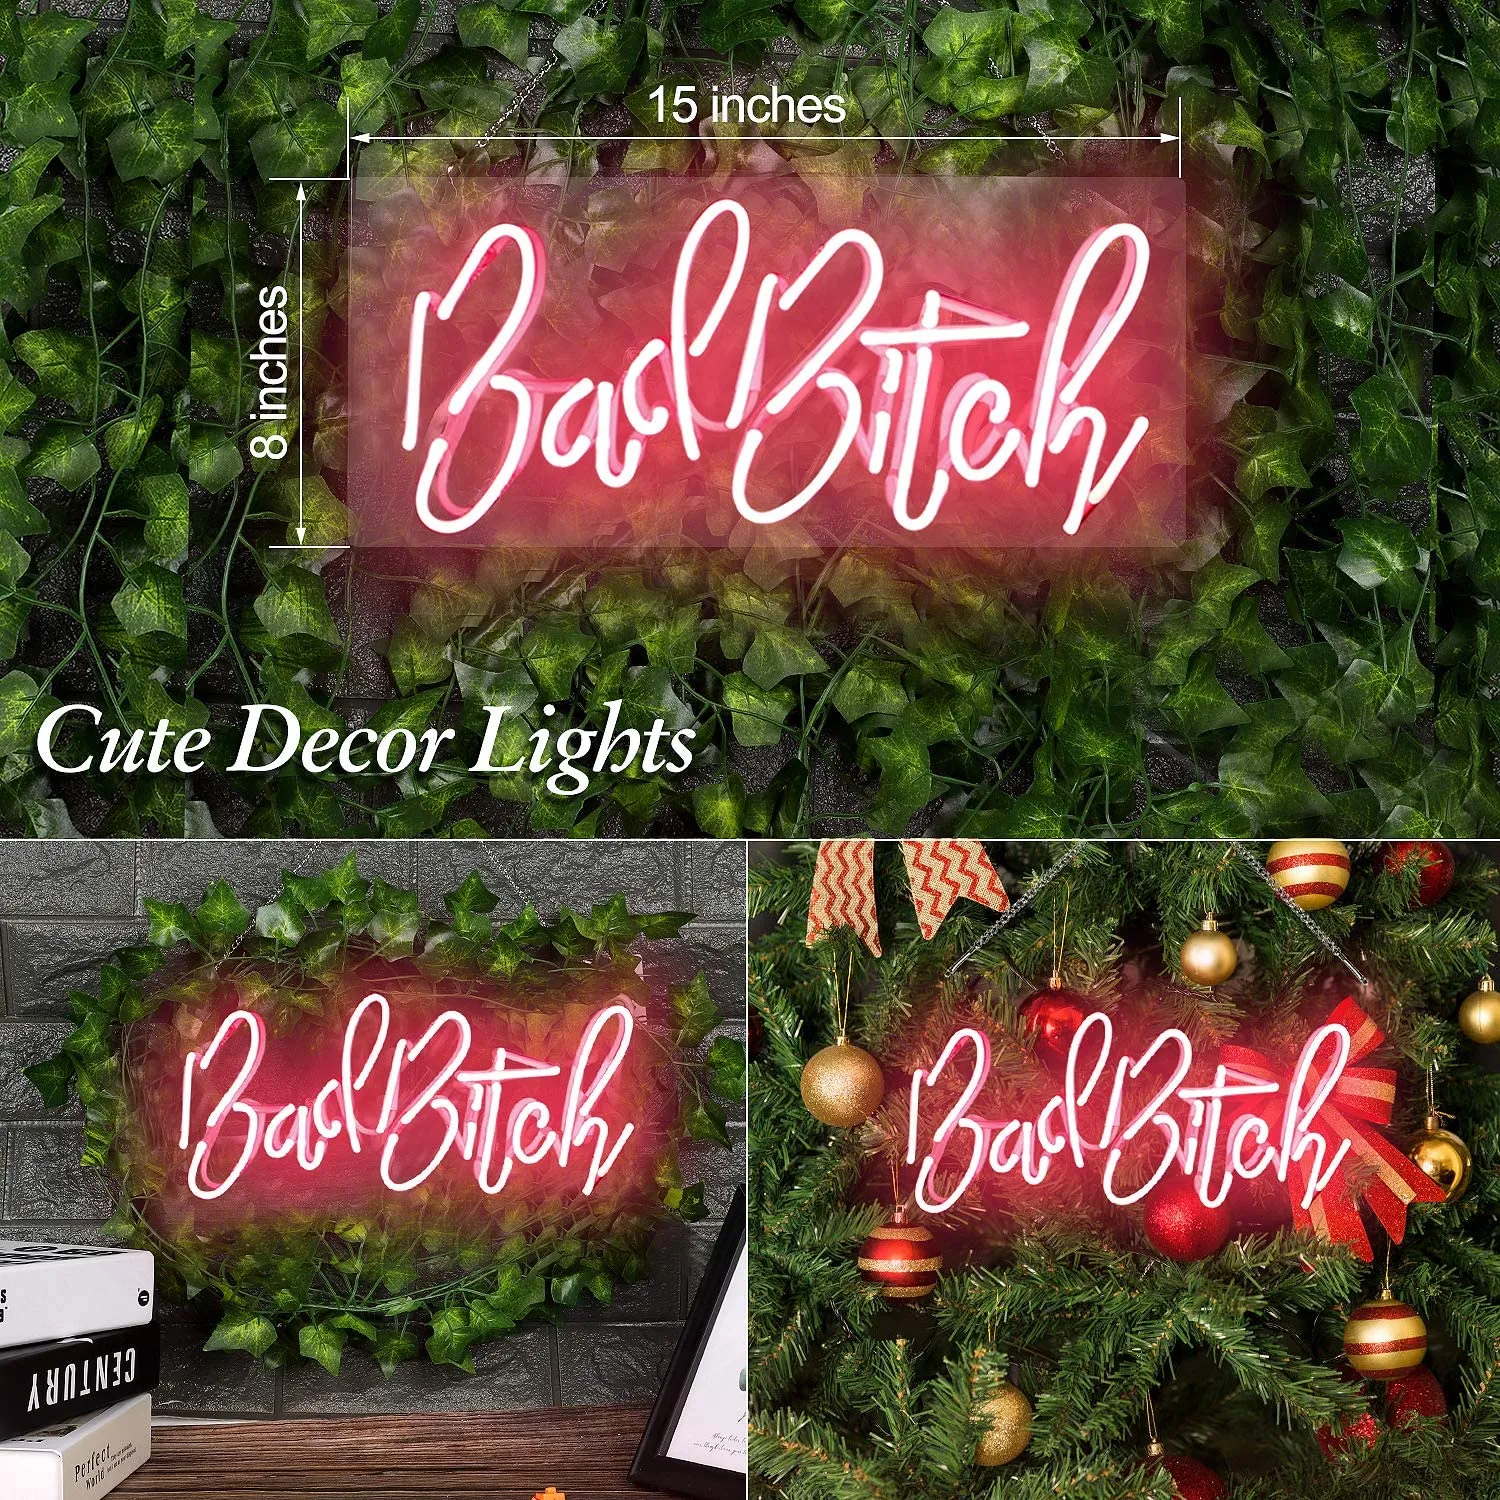 Bad Bitch Real Glass Handmade Neon Wall Signs for Home Light Room Home Bedroom Girls el Beach 15x8 Inches 307Y